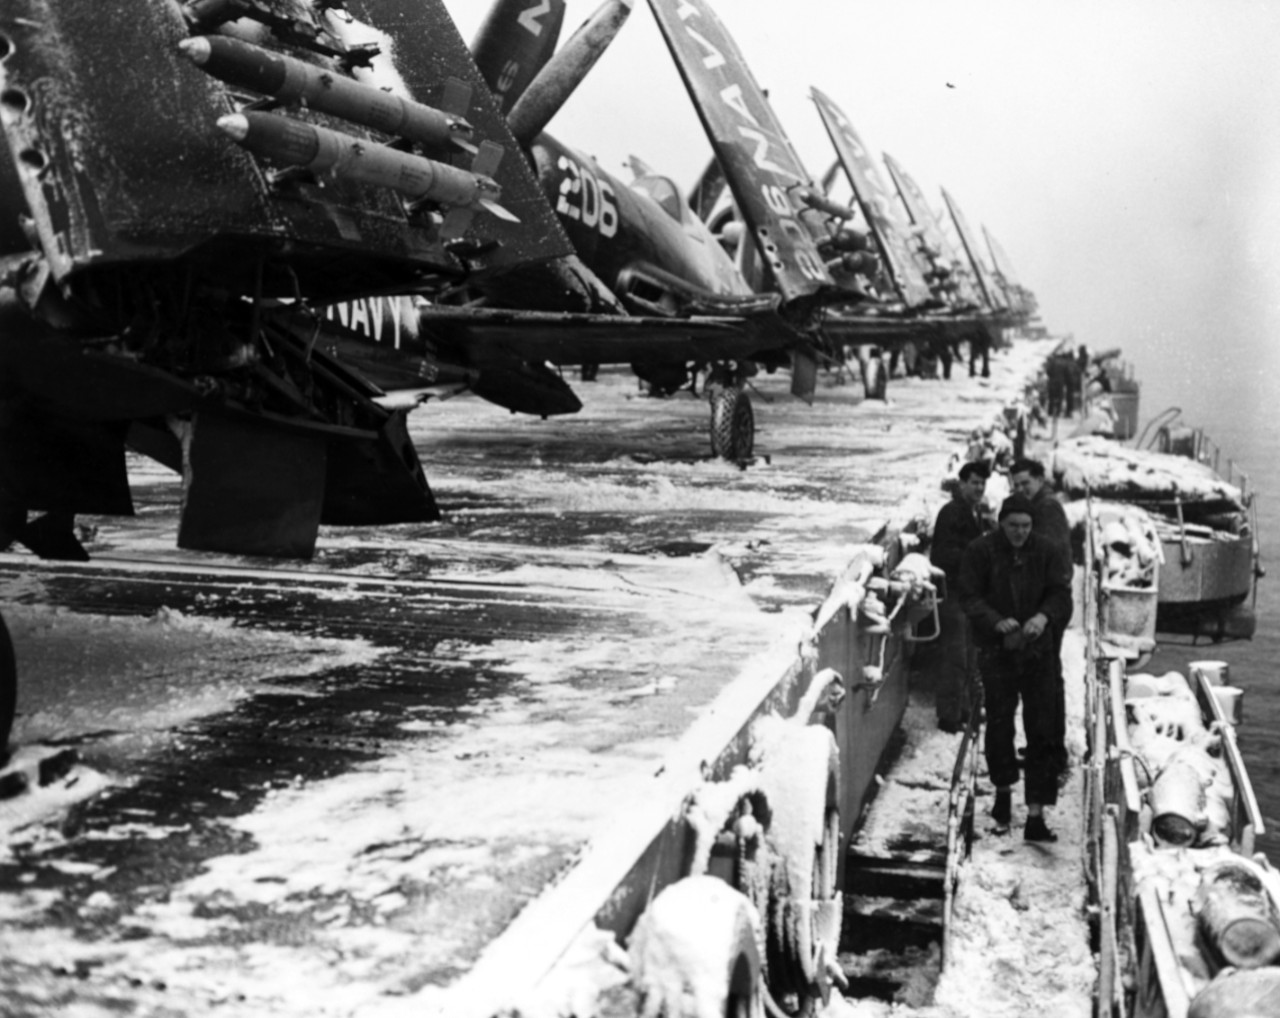 The ships of the task force fight in bitter winter weather but crewmen take a break and participate in a snowball fight while clearing snow from Valley Forge’s flight deck in Korean waters, early 1951. The planes parked on the deck are Vought F4F...